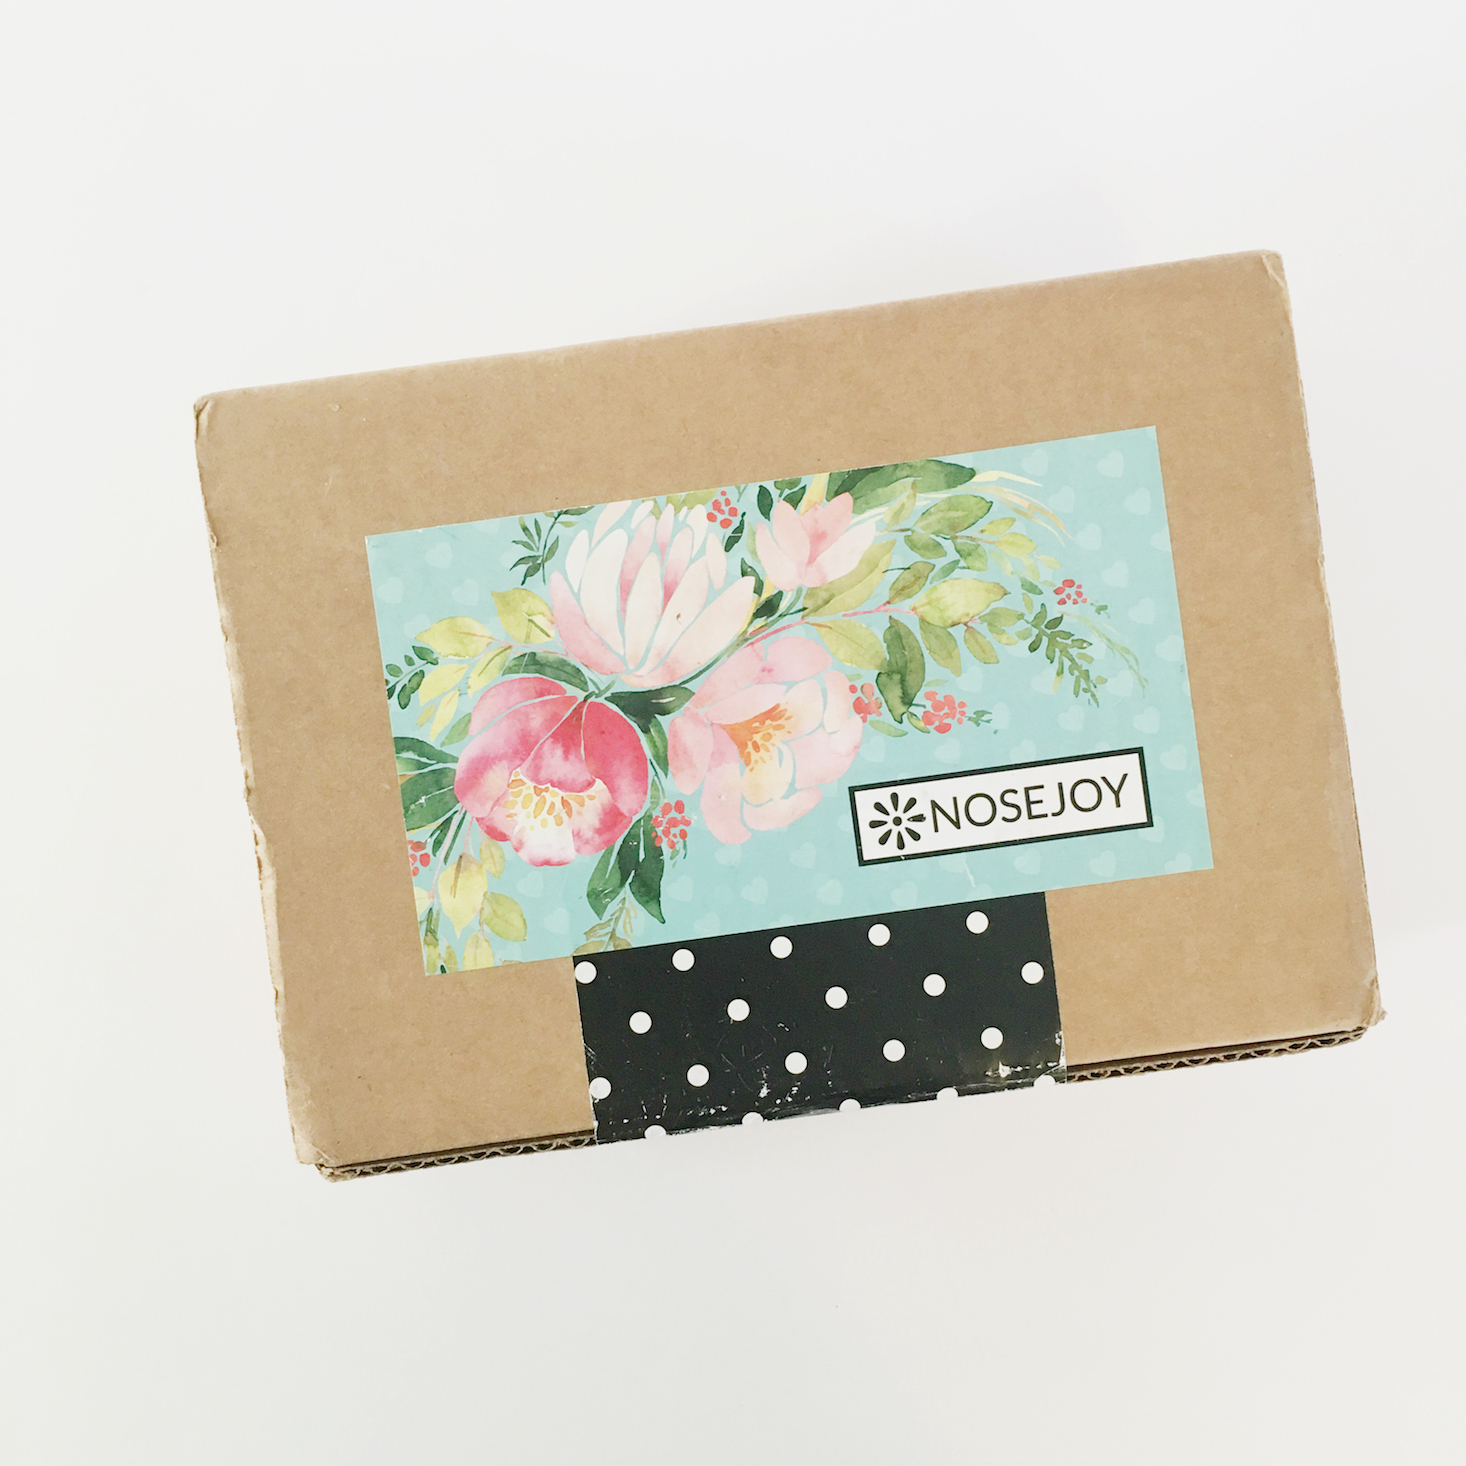 Nosejoy Monthly Subscription Box Review + Coupon – February 2018